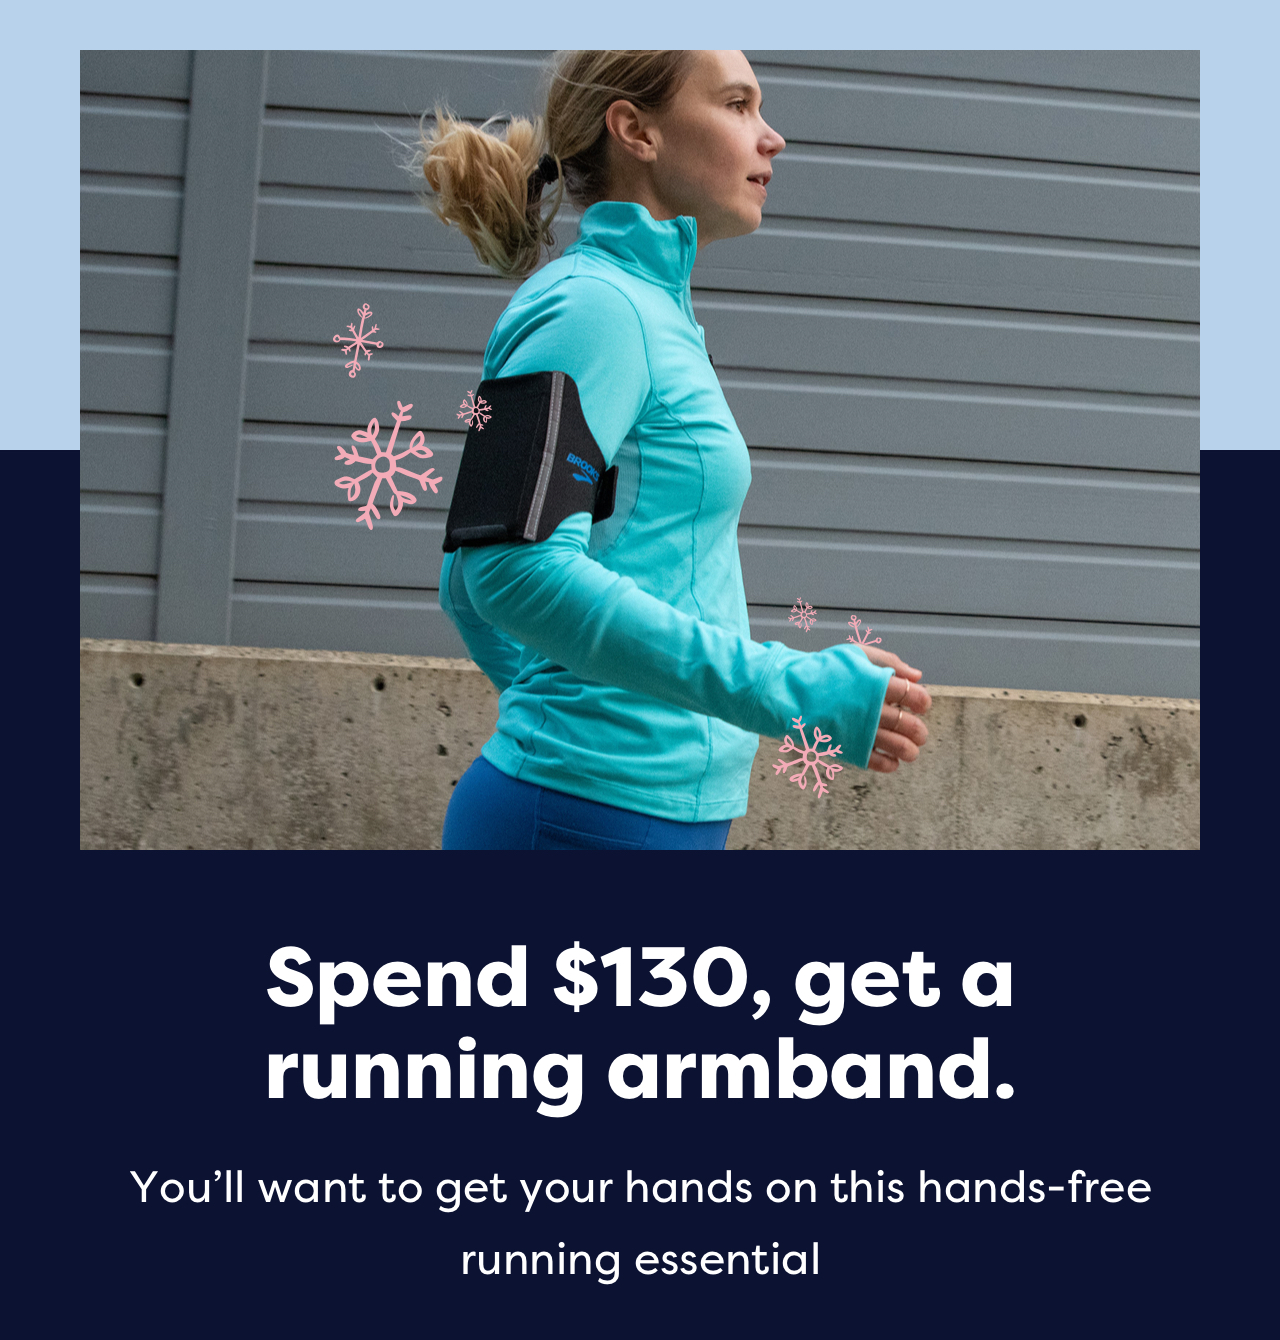 Spend $130, get a running armband. | You’ll want to get your hands on this hands-free running essential